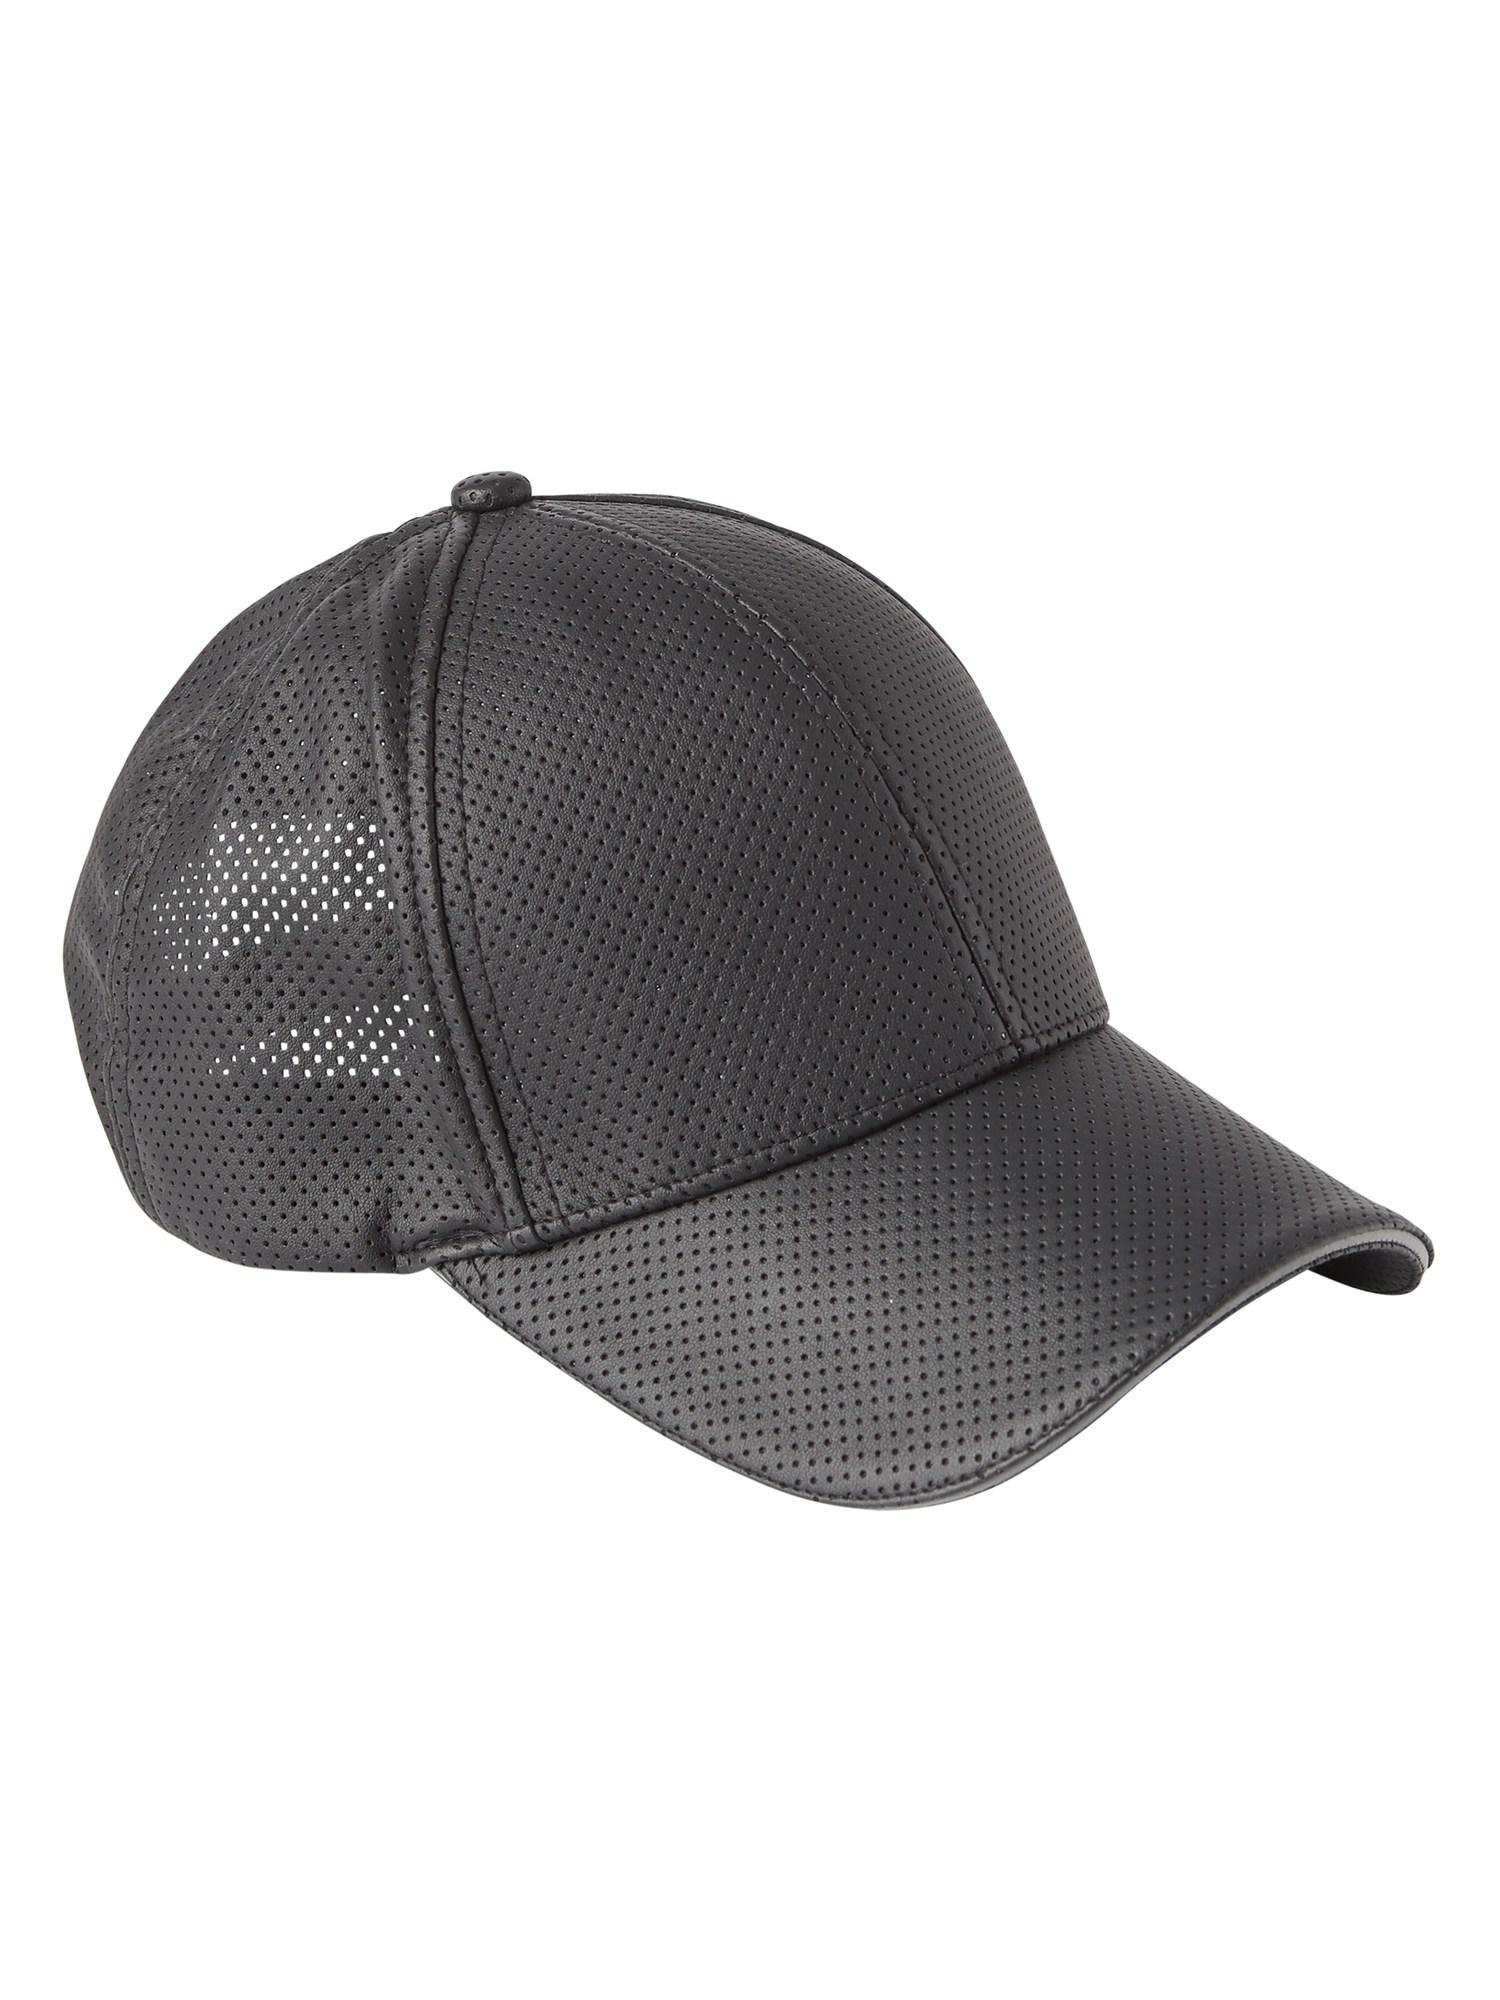 Athleta Perforated Faux Leather Baseball Cap in Black - Lyst